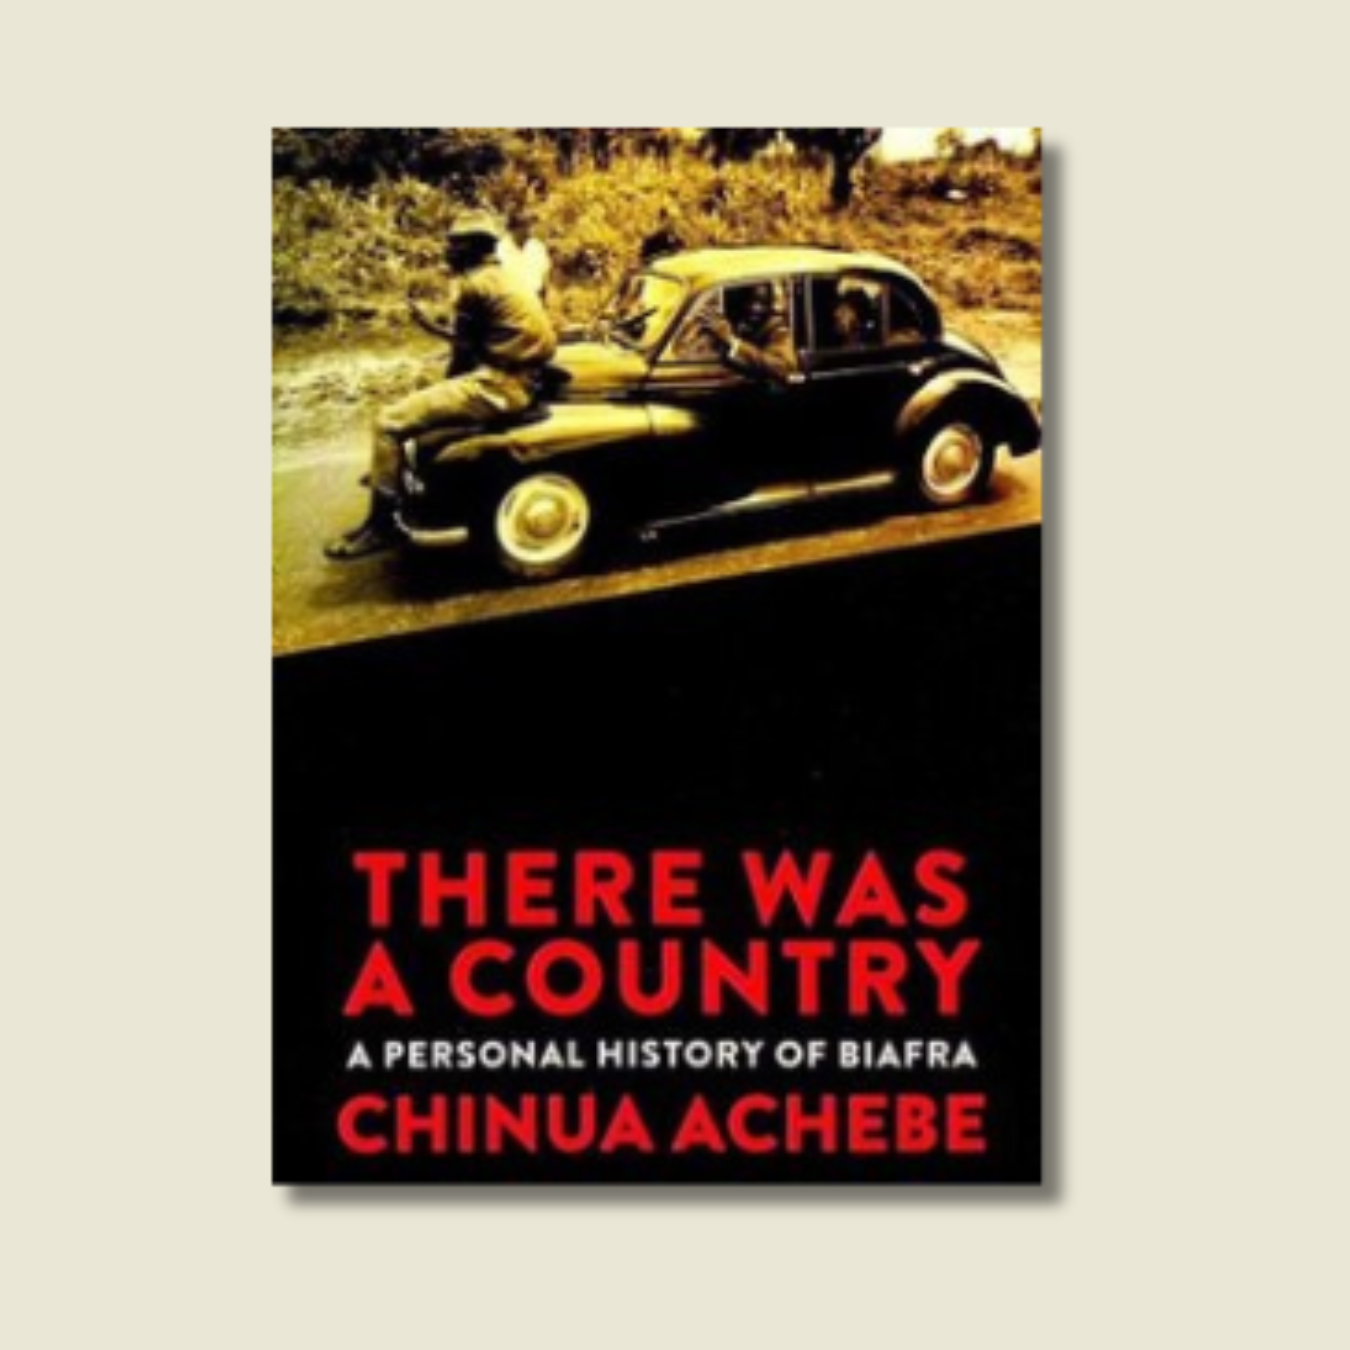 THERE WAS A COUNTRY BY CHINUA ACHEBE